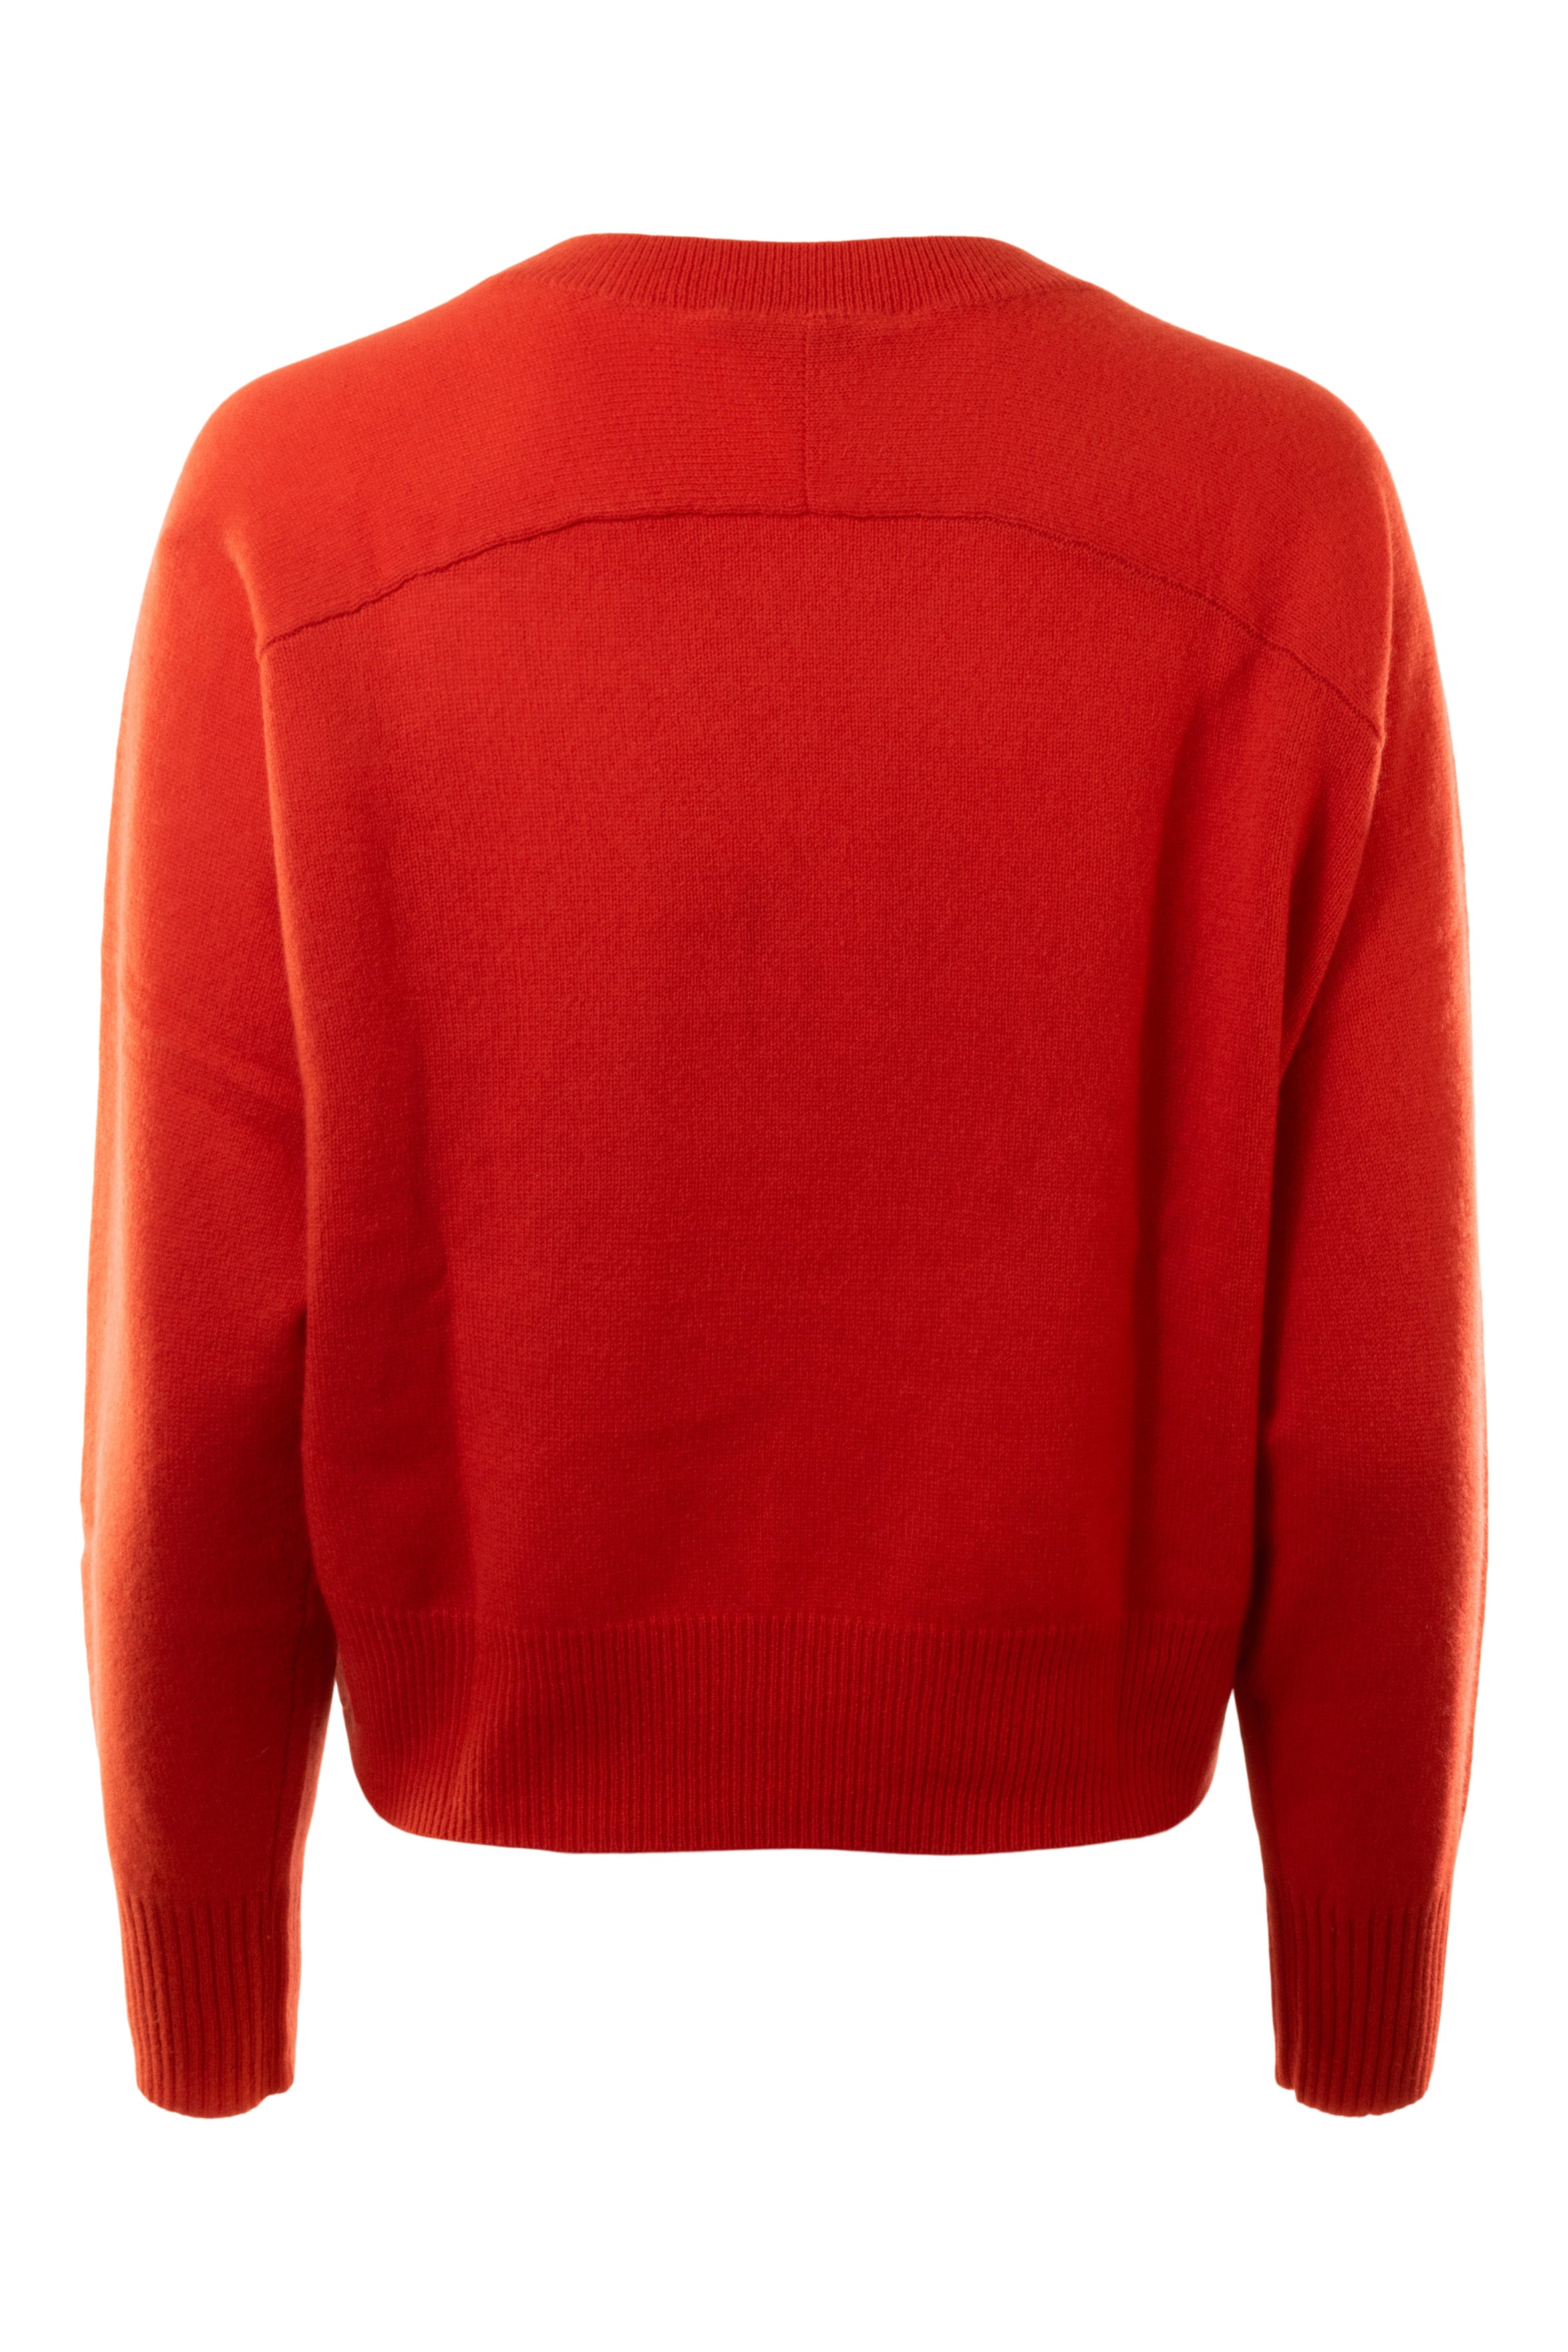 Autumn Cashmere V-neck with Back Yoke in Flame